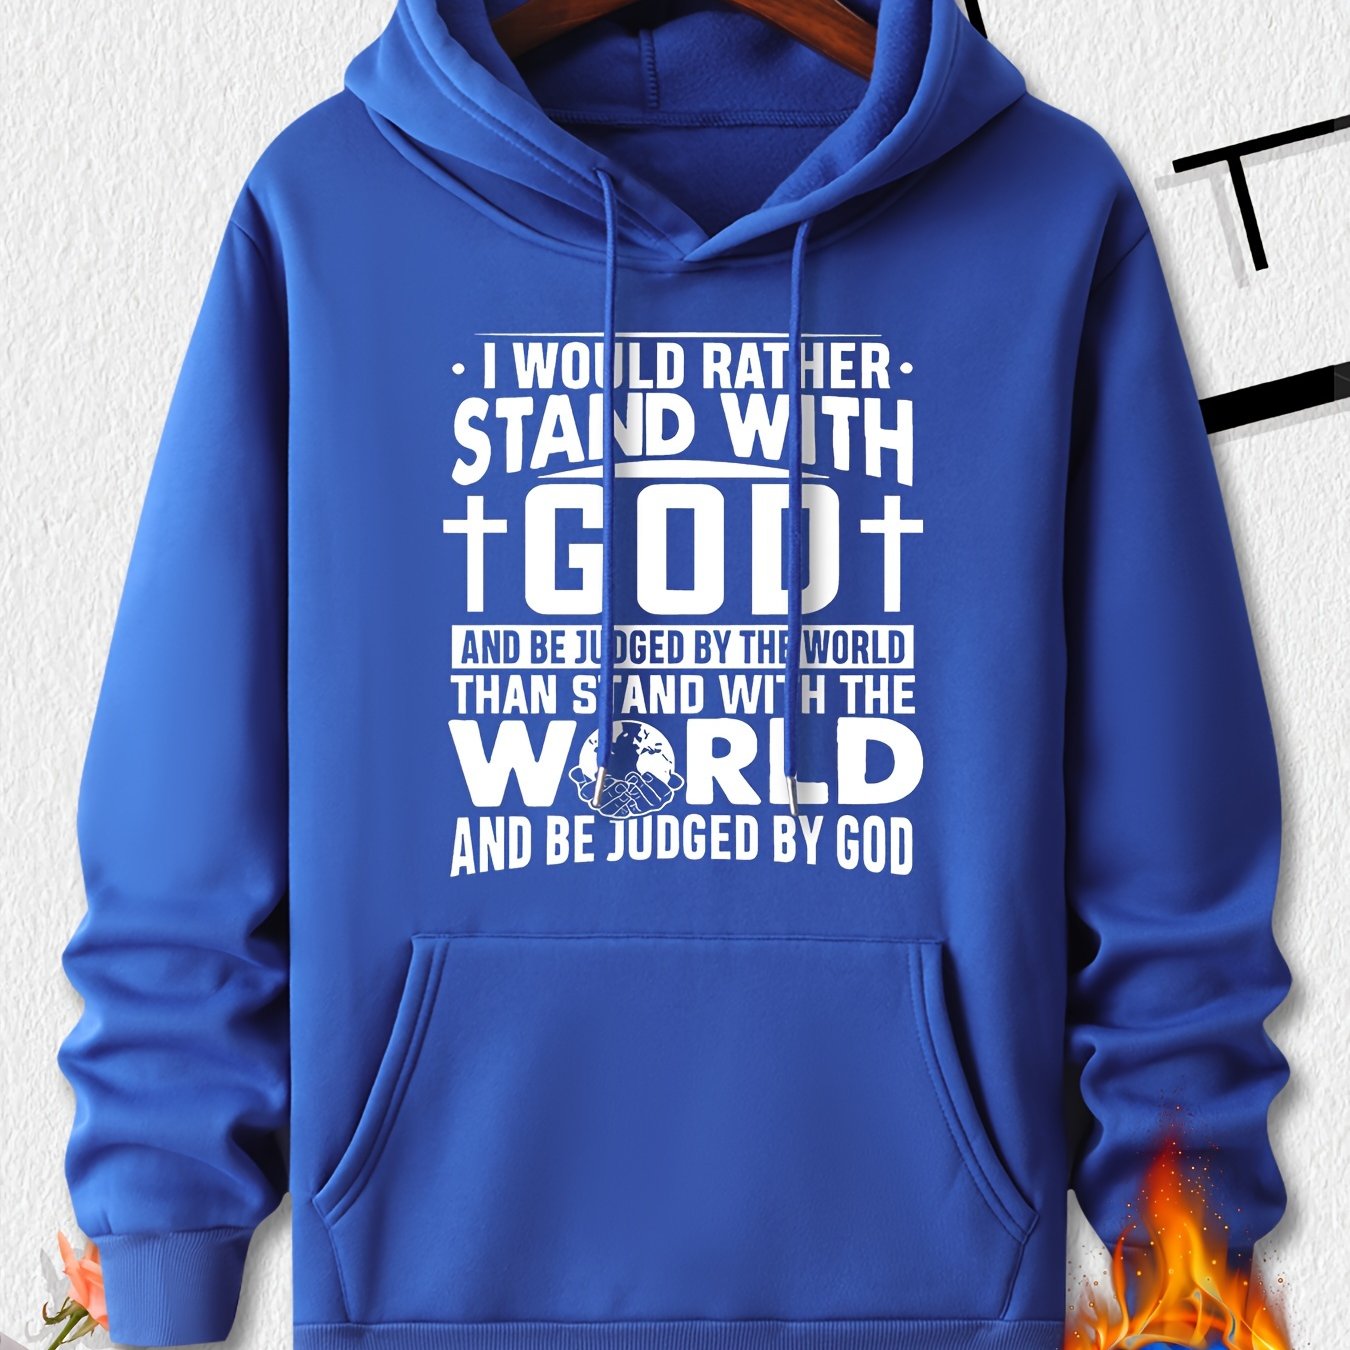 I Would Rather Stand With God Christian Unisex Pullover Hooded Sweatshirt claimedbygoddesigns